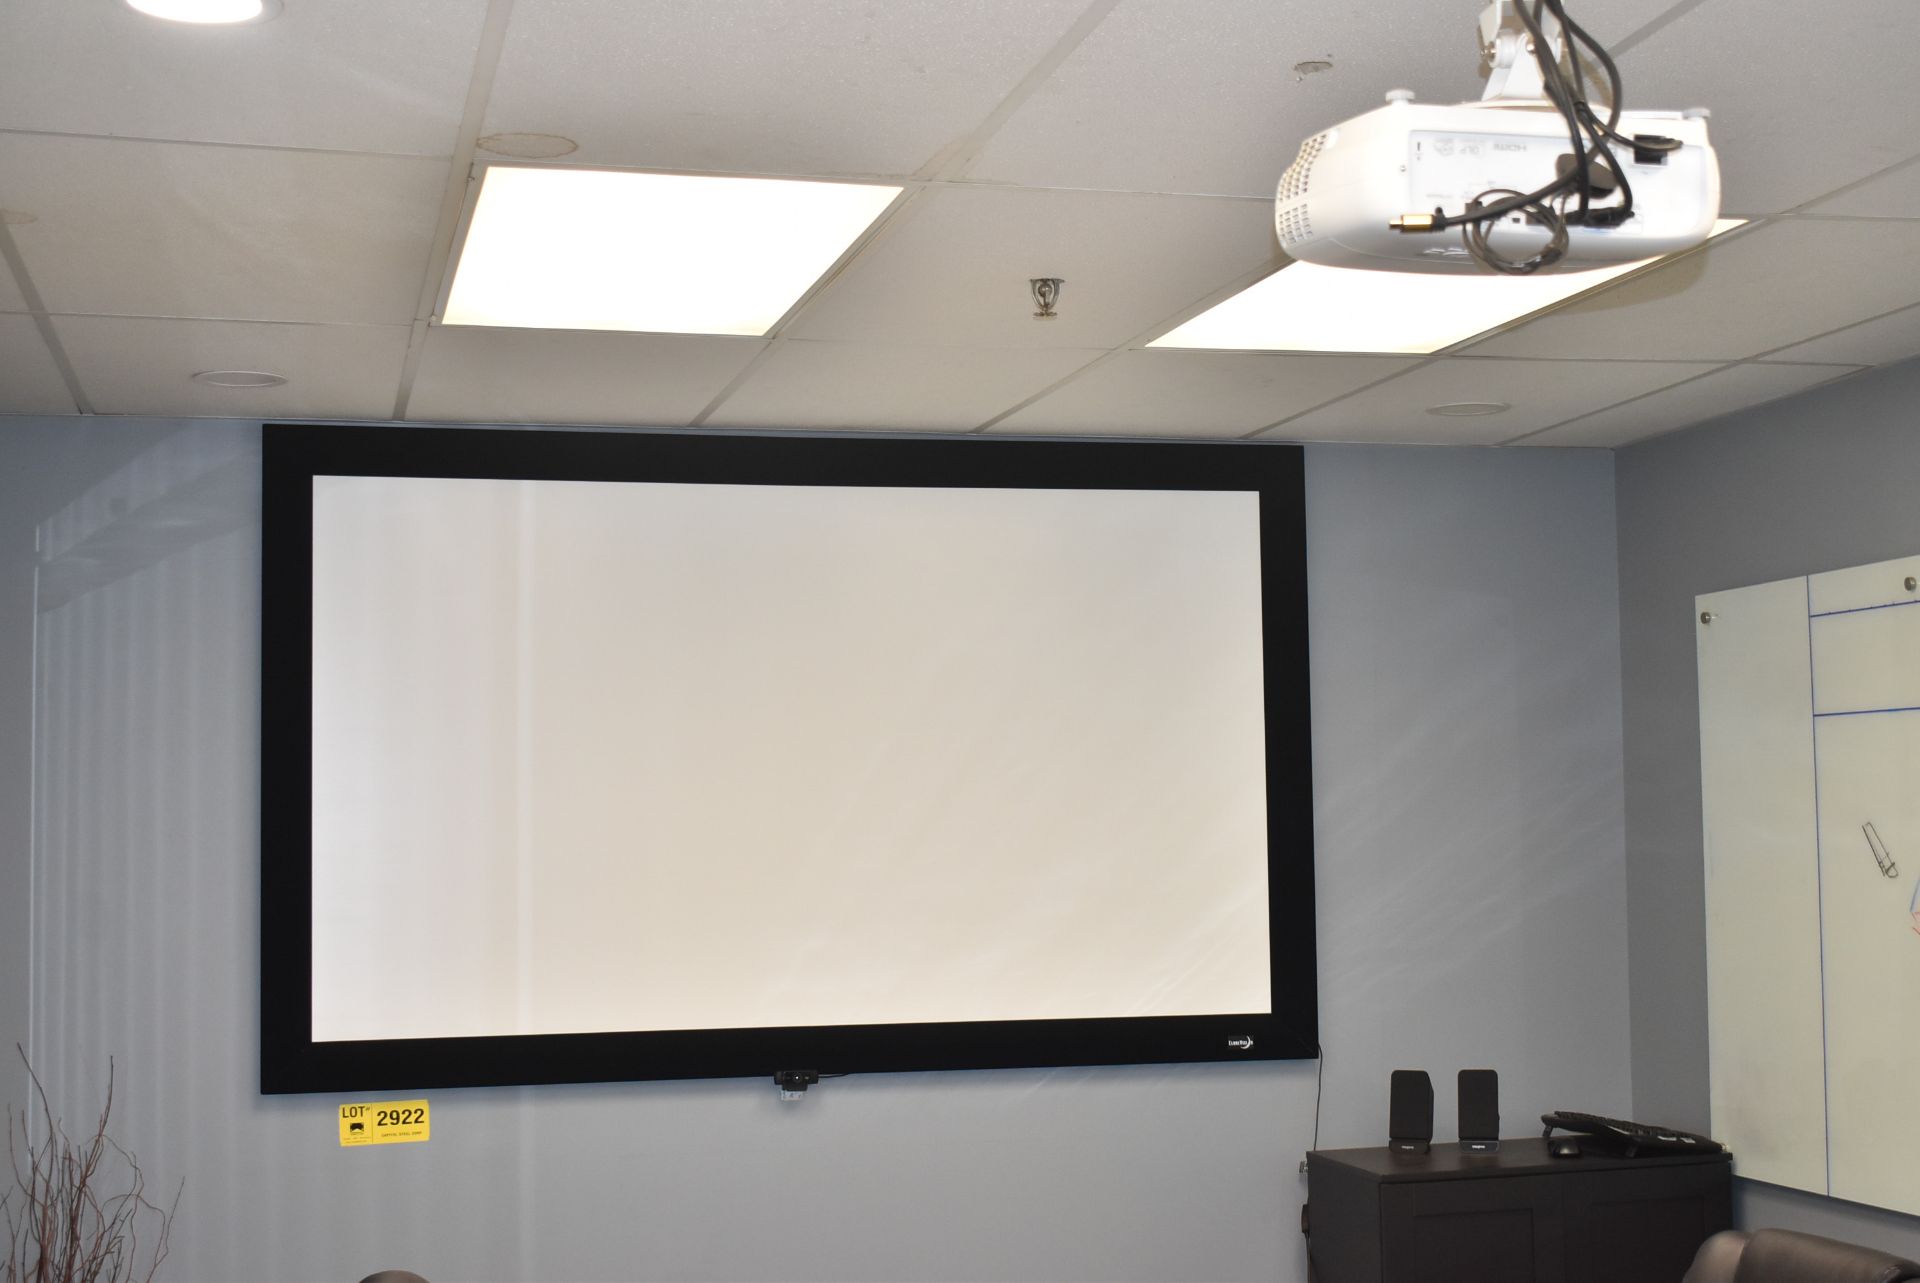 LOT/ ELUNEVISION FIXED FRAME PROJECTION SCREEN WITH BENO CEILING MOUNTED PROJECTOR